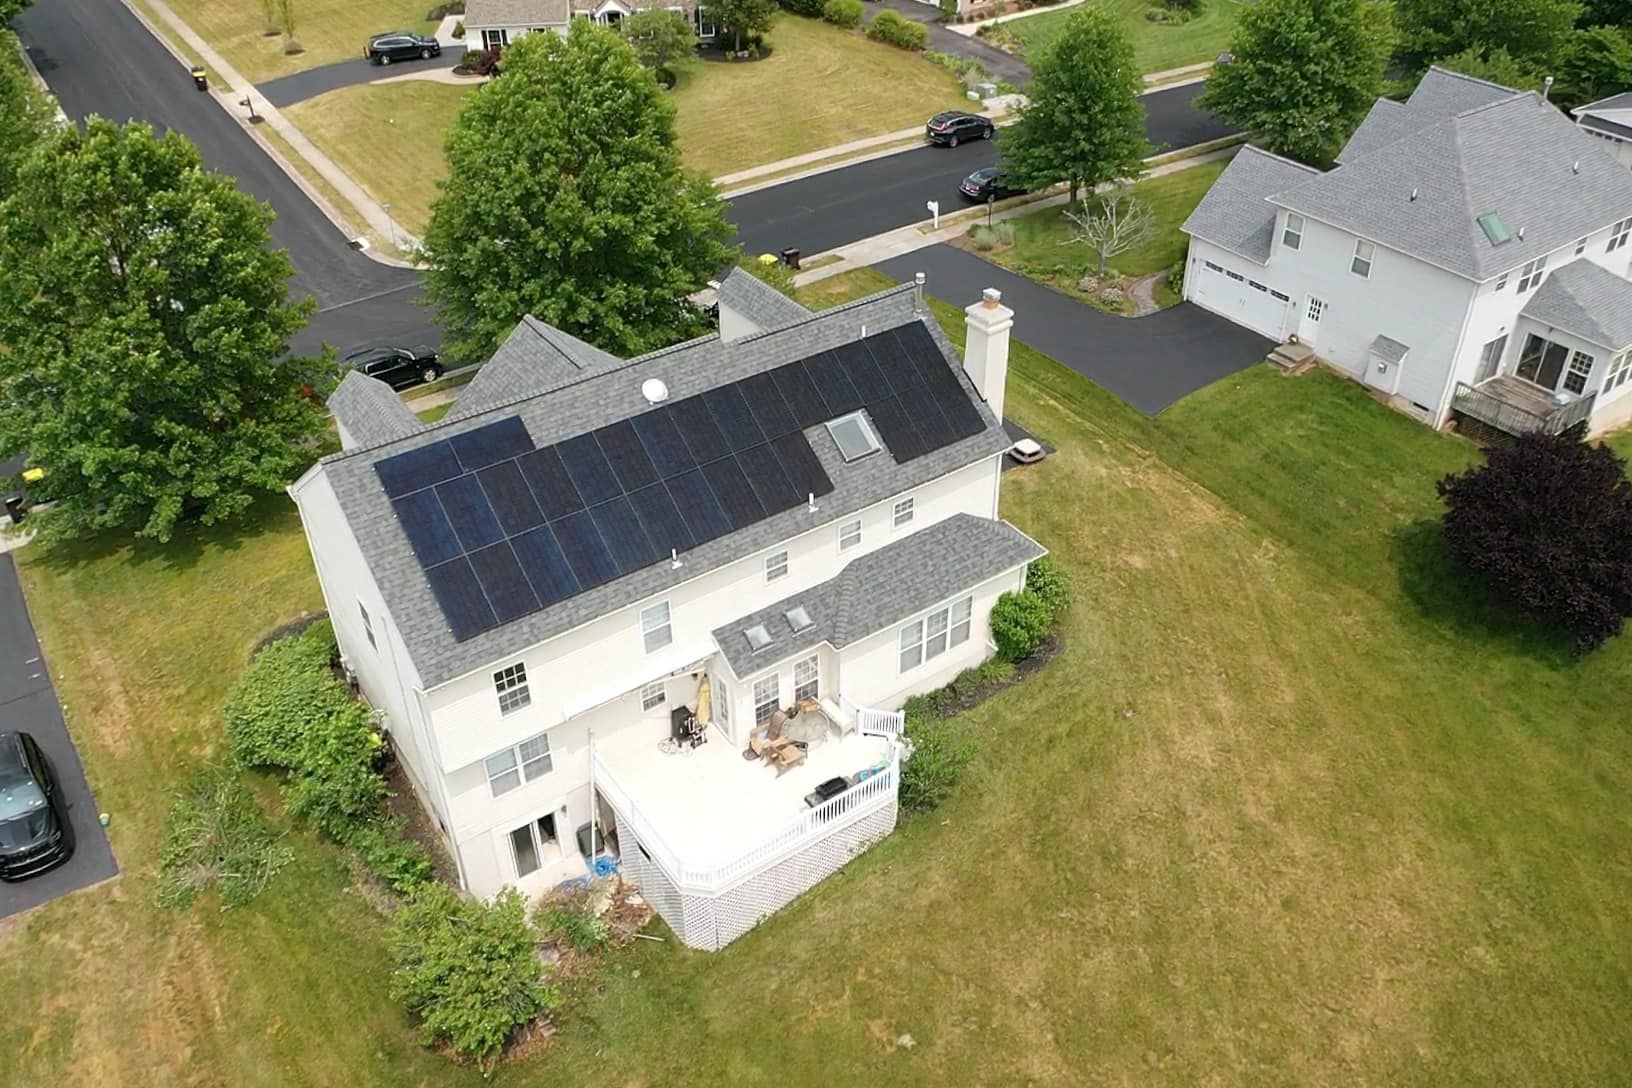 Over the Top Solar Solutions 30 panel installation